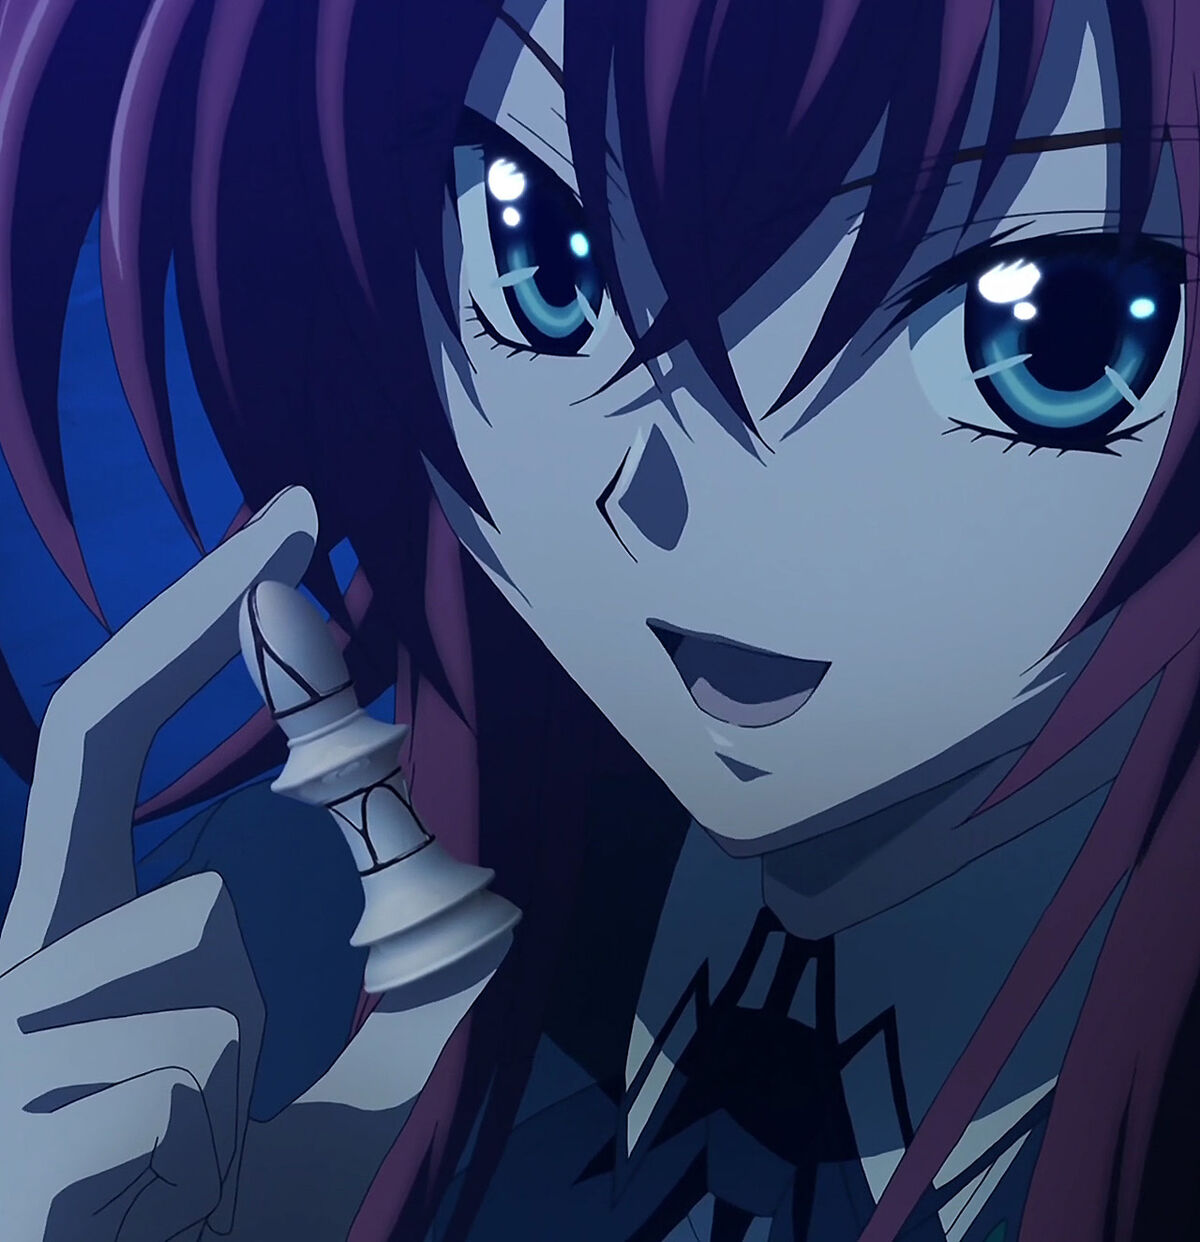 100+] Highschool Dxd Pictures